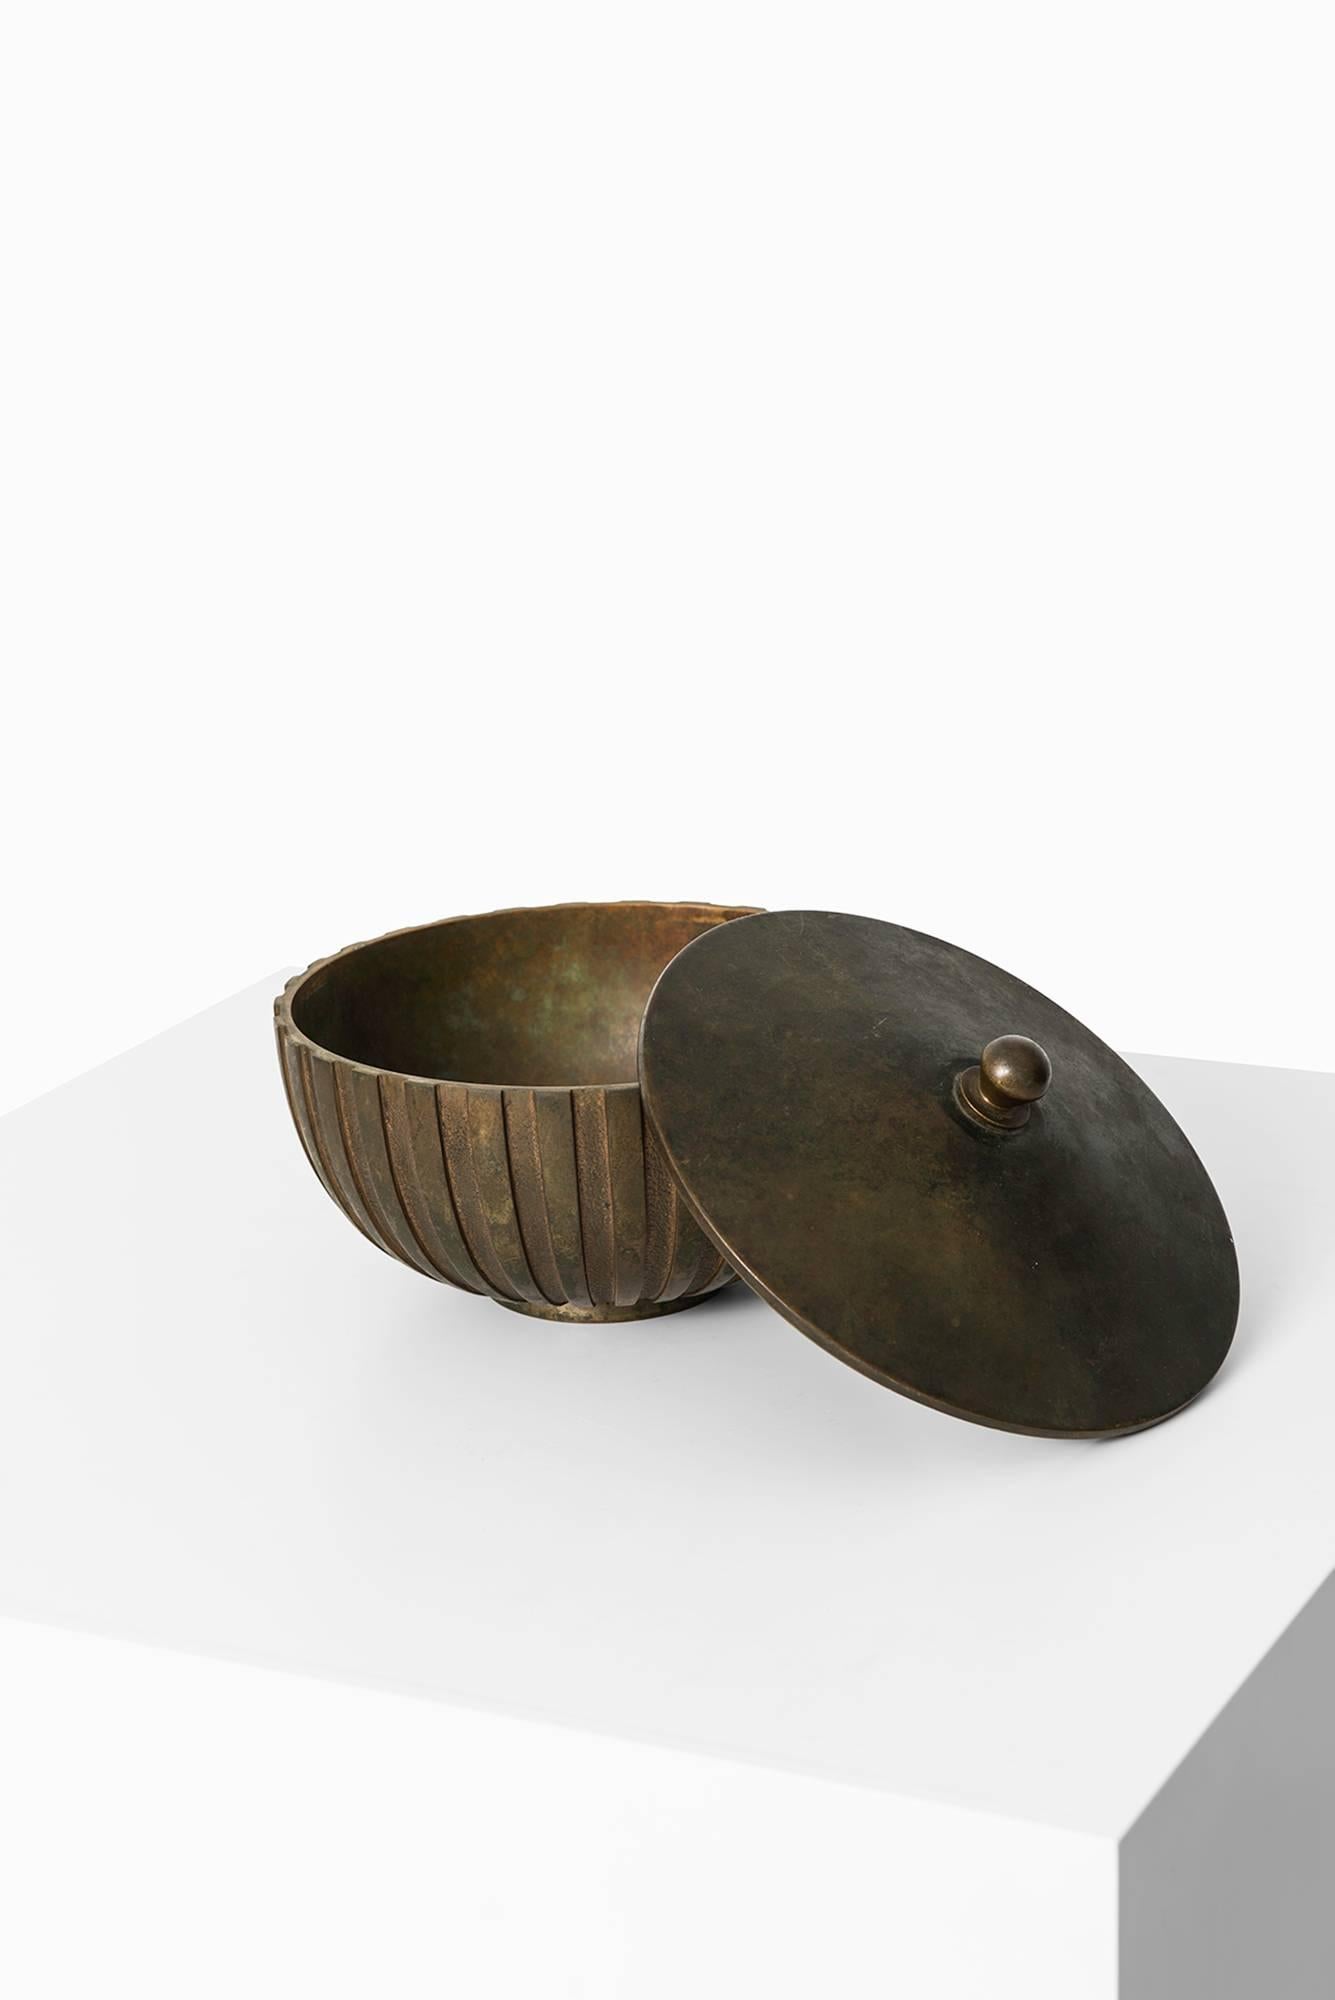 Scandinavian Modern Bronze Bowl with Lid Produced by Tinos in Denmark